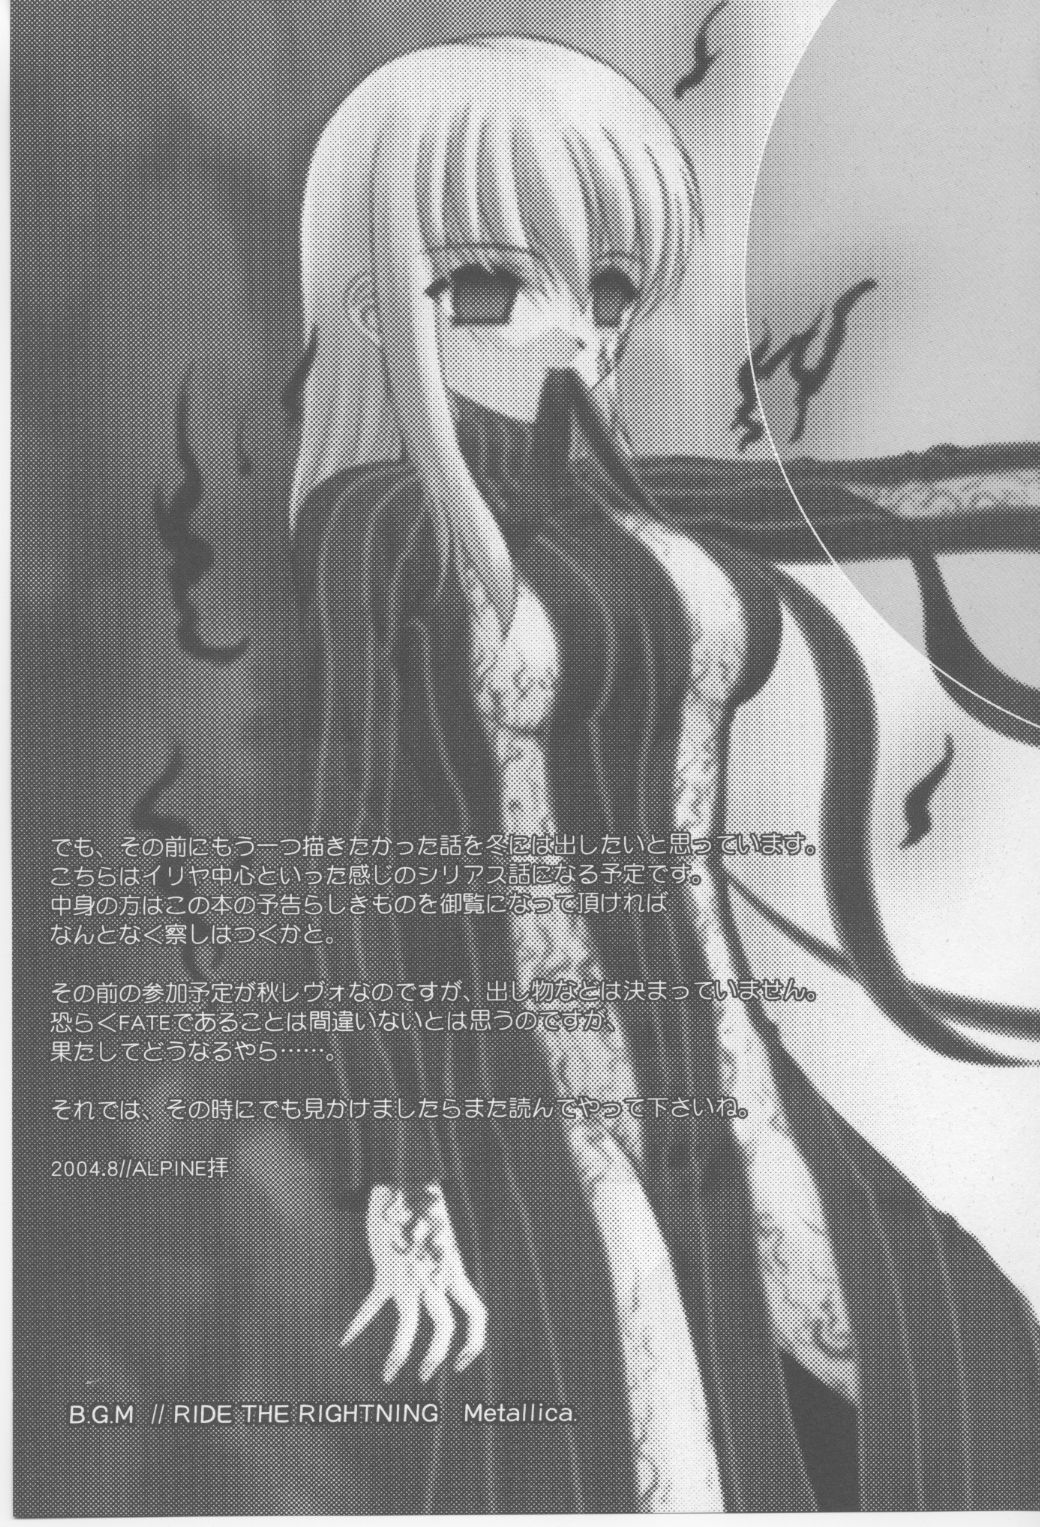 (C66) [Dieppe Factory (Alpine)] FADE TO BLACK VOL.1 (Fate/Stay Night) page 40 full